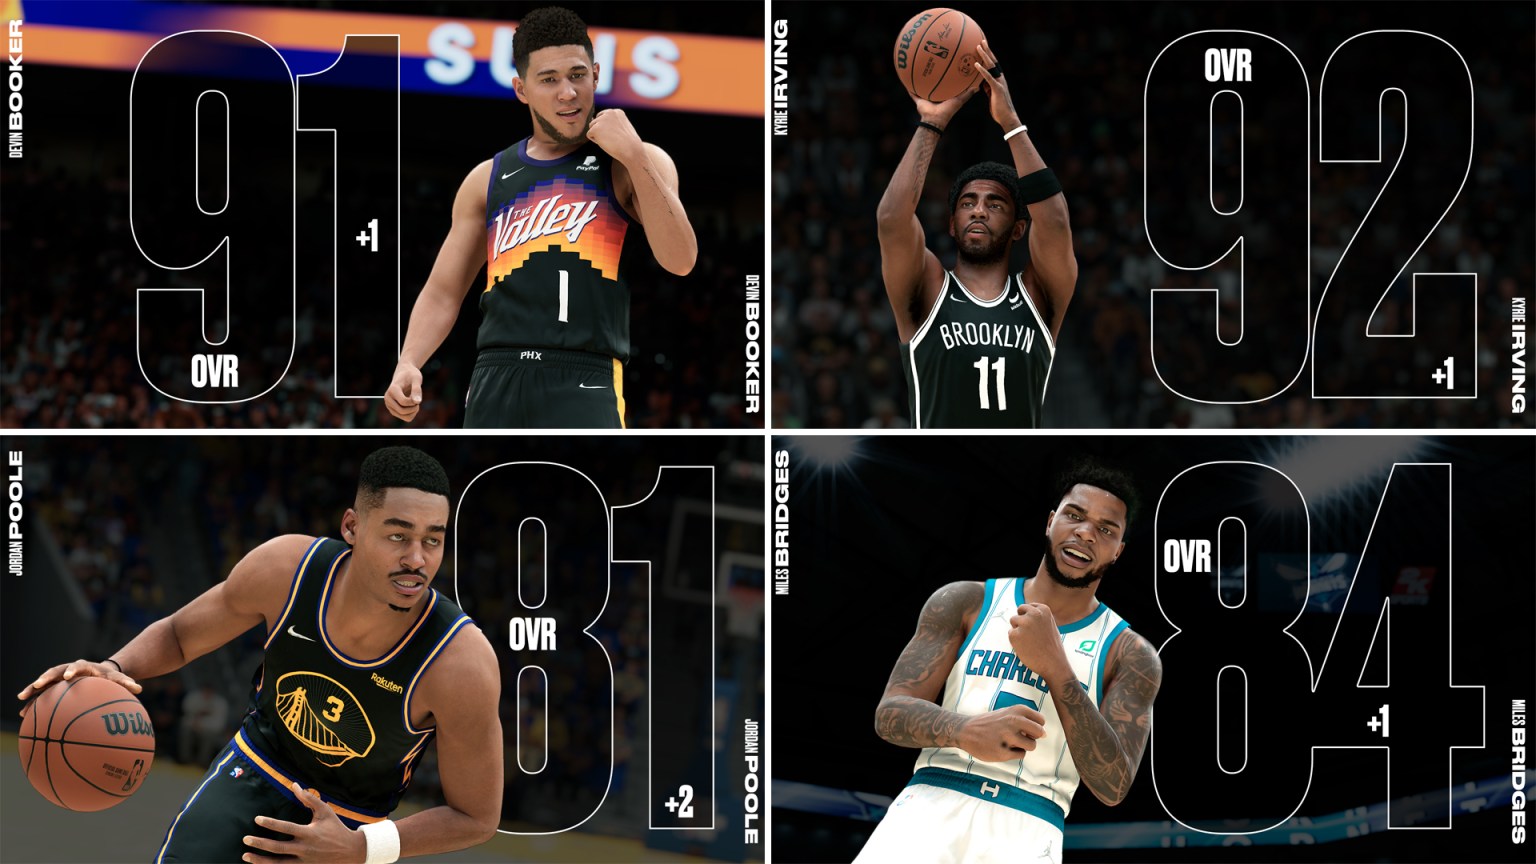 NBA 2K22 Roster Update Available Full Details Here (331)